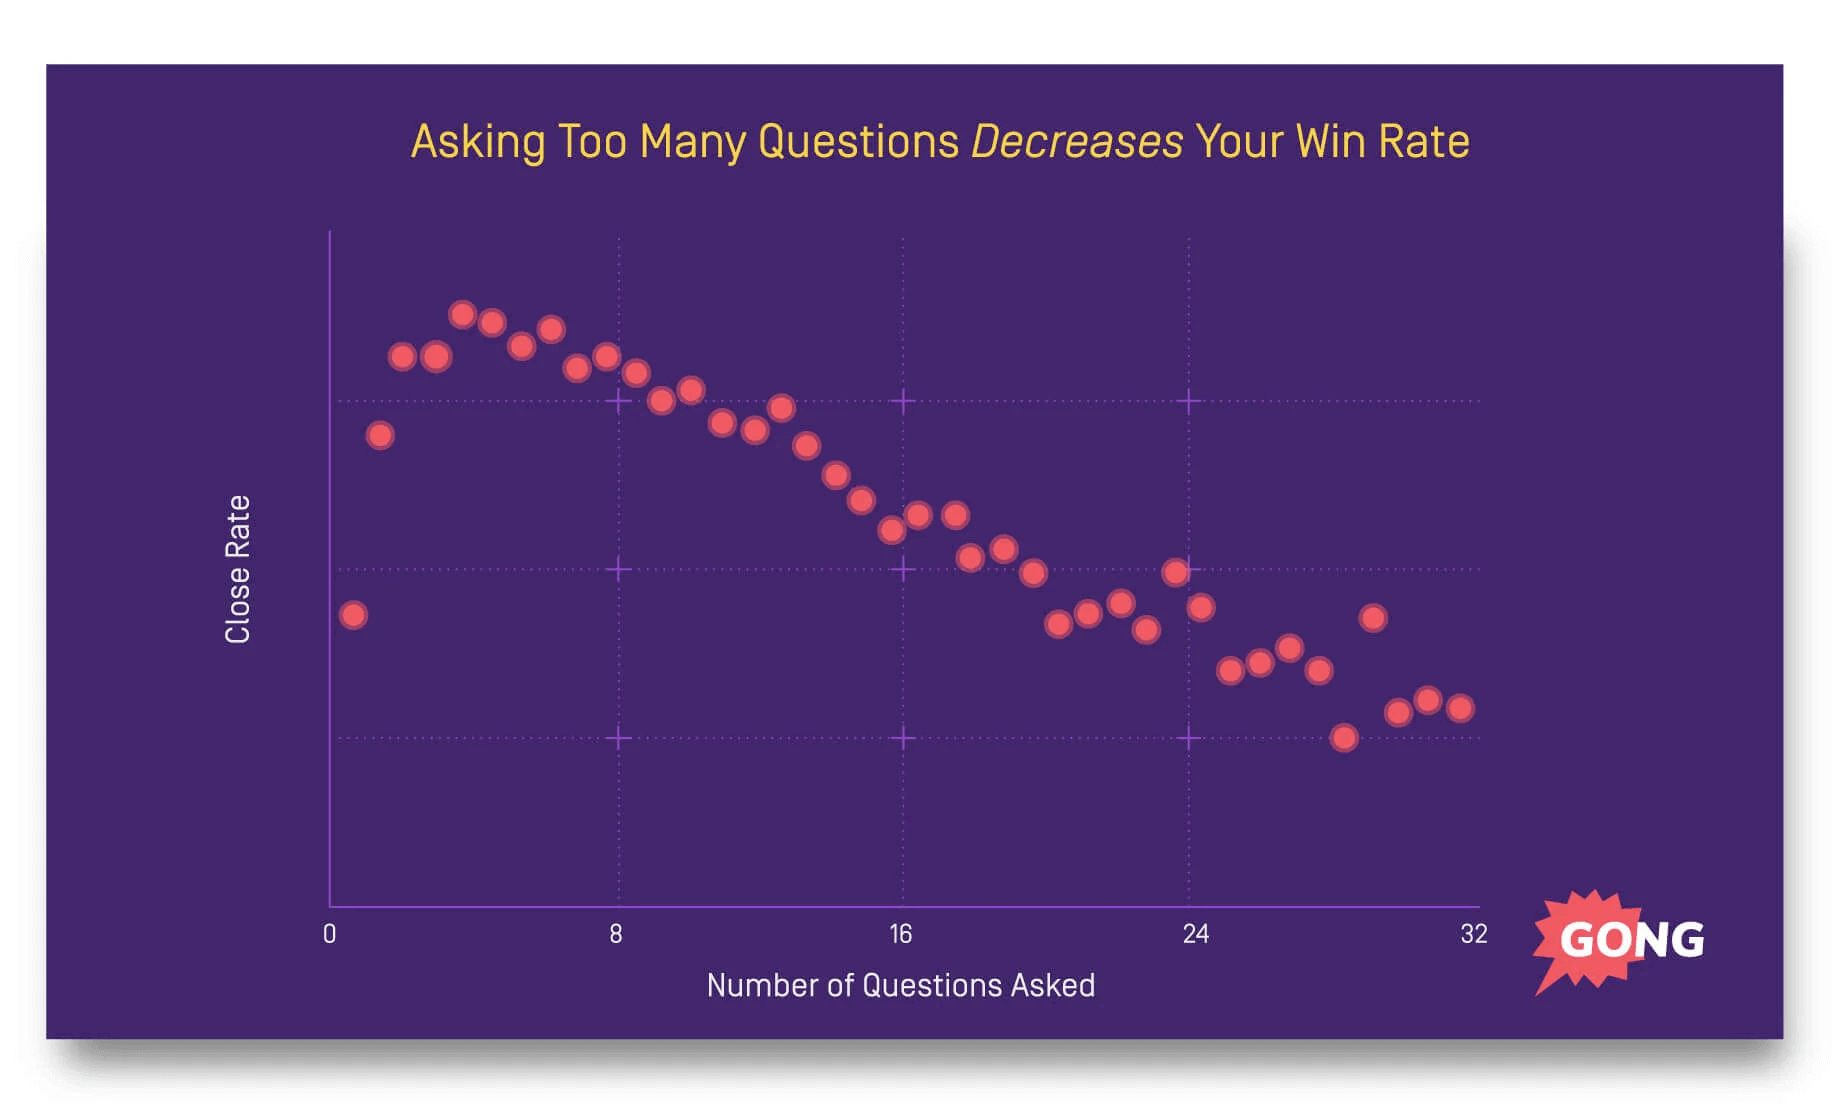 Asking too many questions decreases win rate